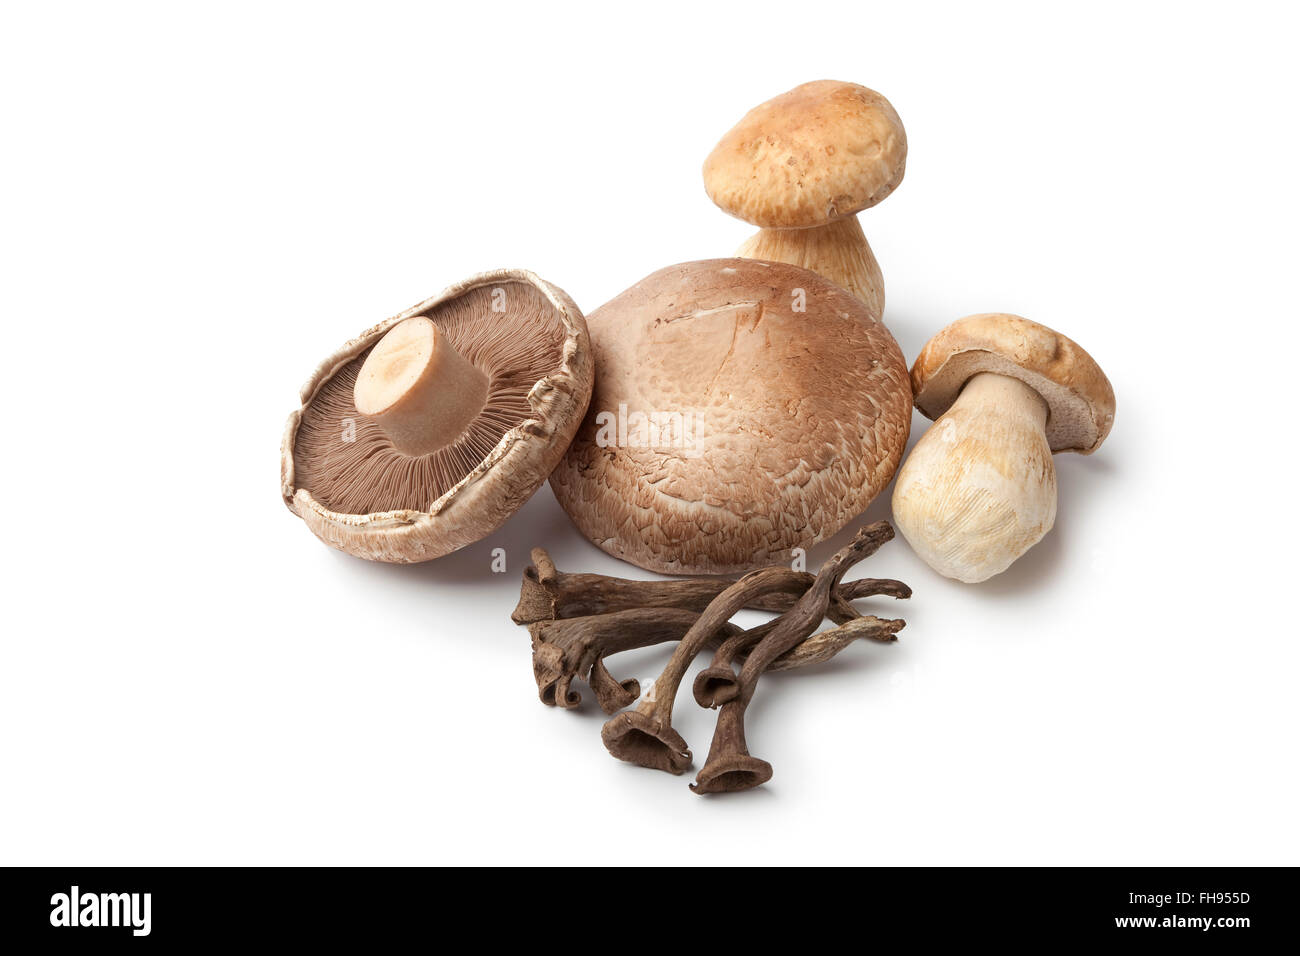 Composition of fresh raw edible mushrooms on white background Stock Photo